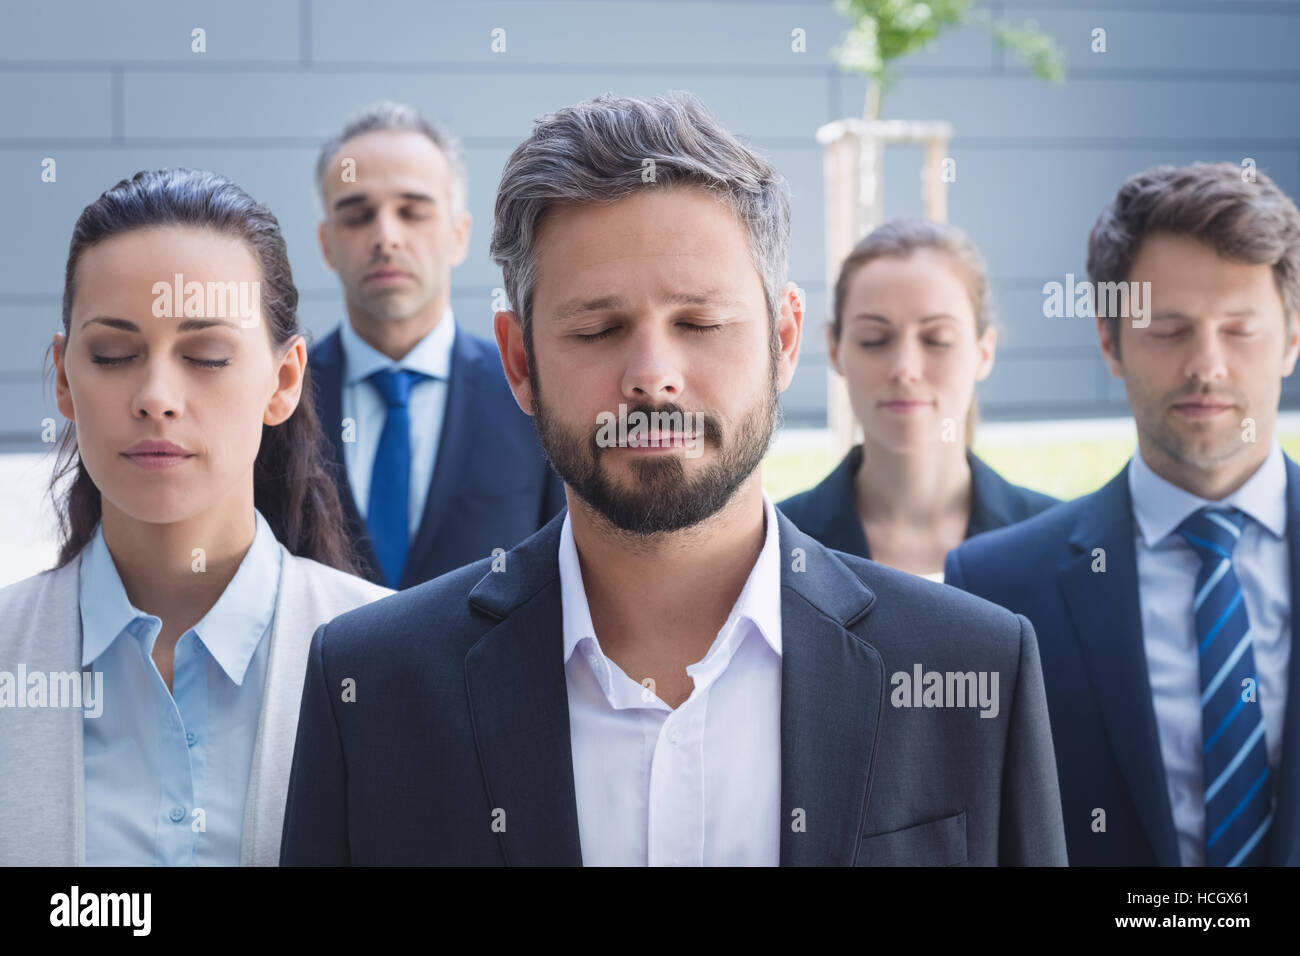 Group of business people with eyes closed Stock Photo